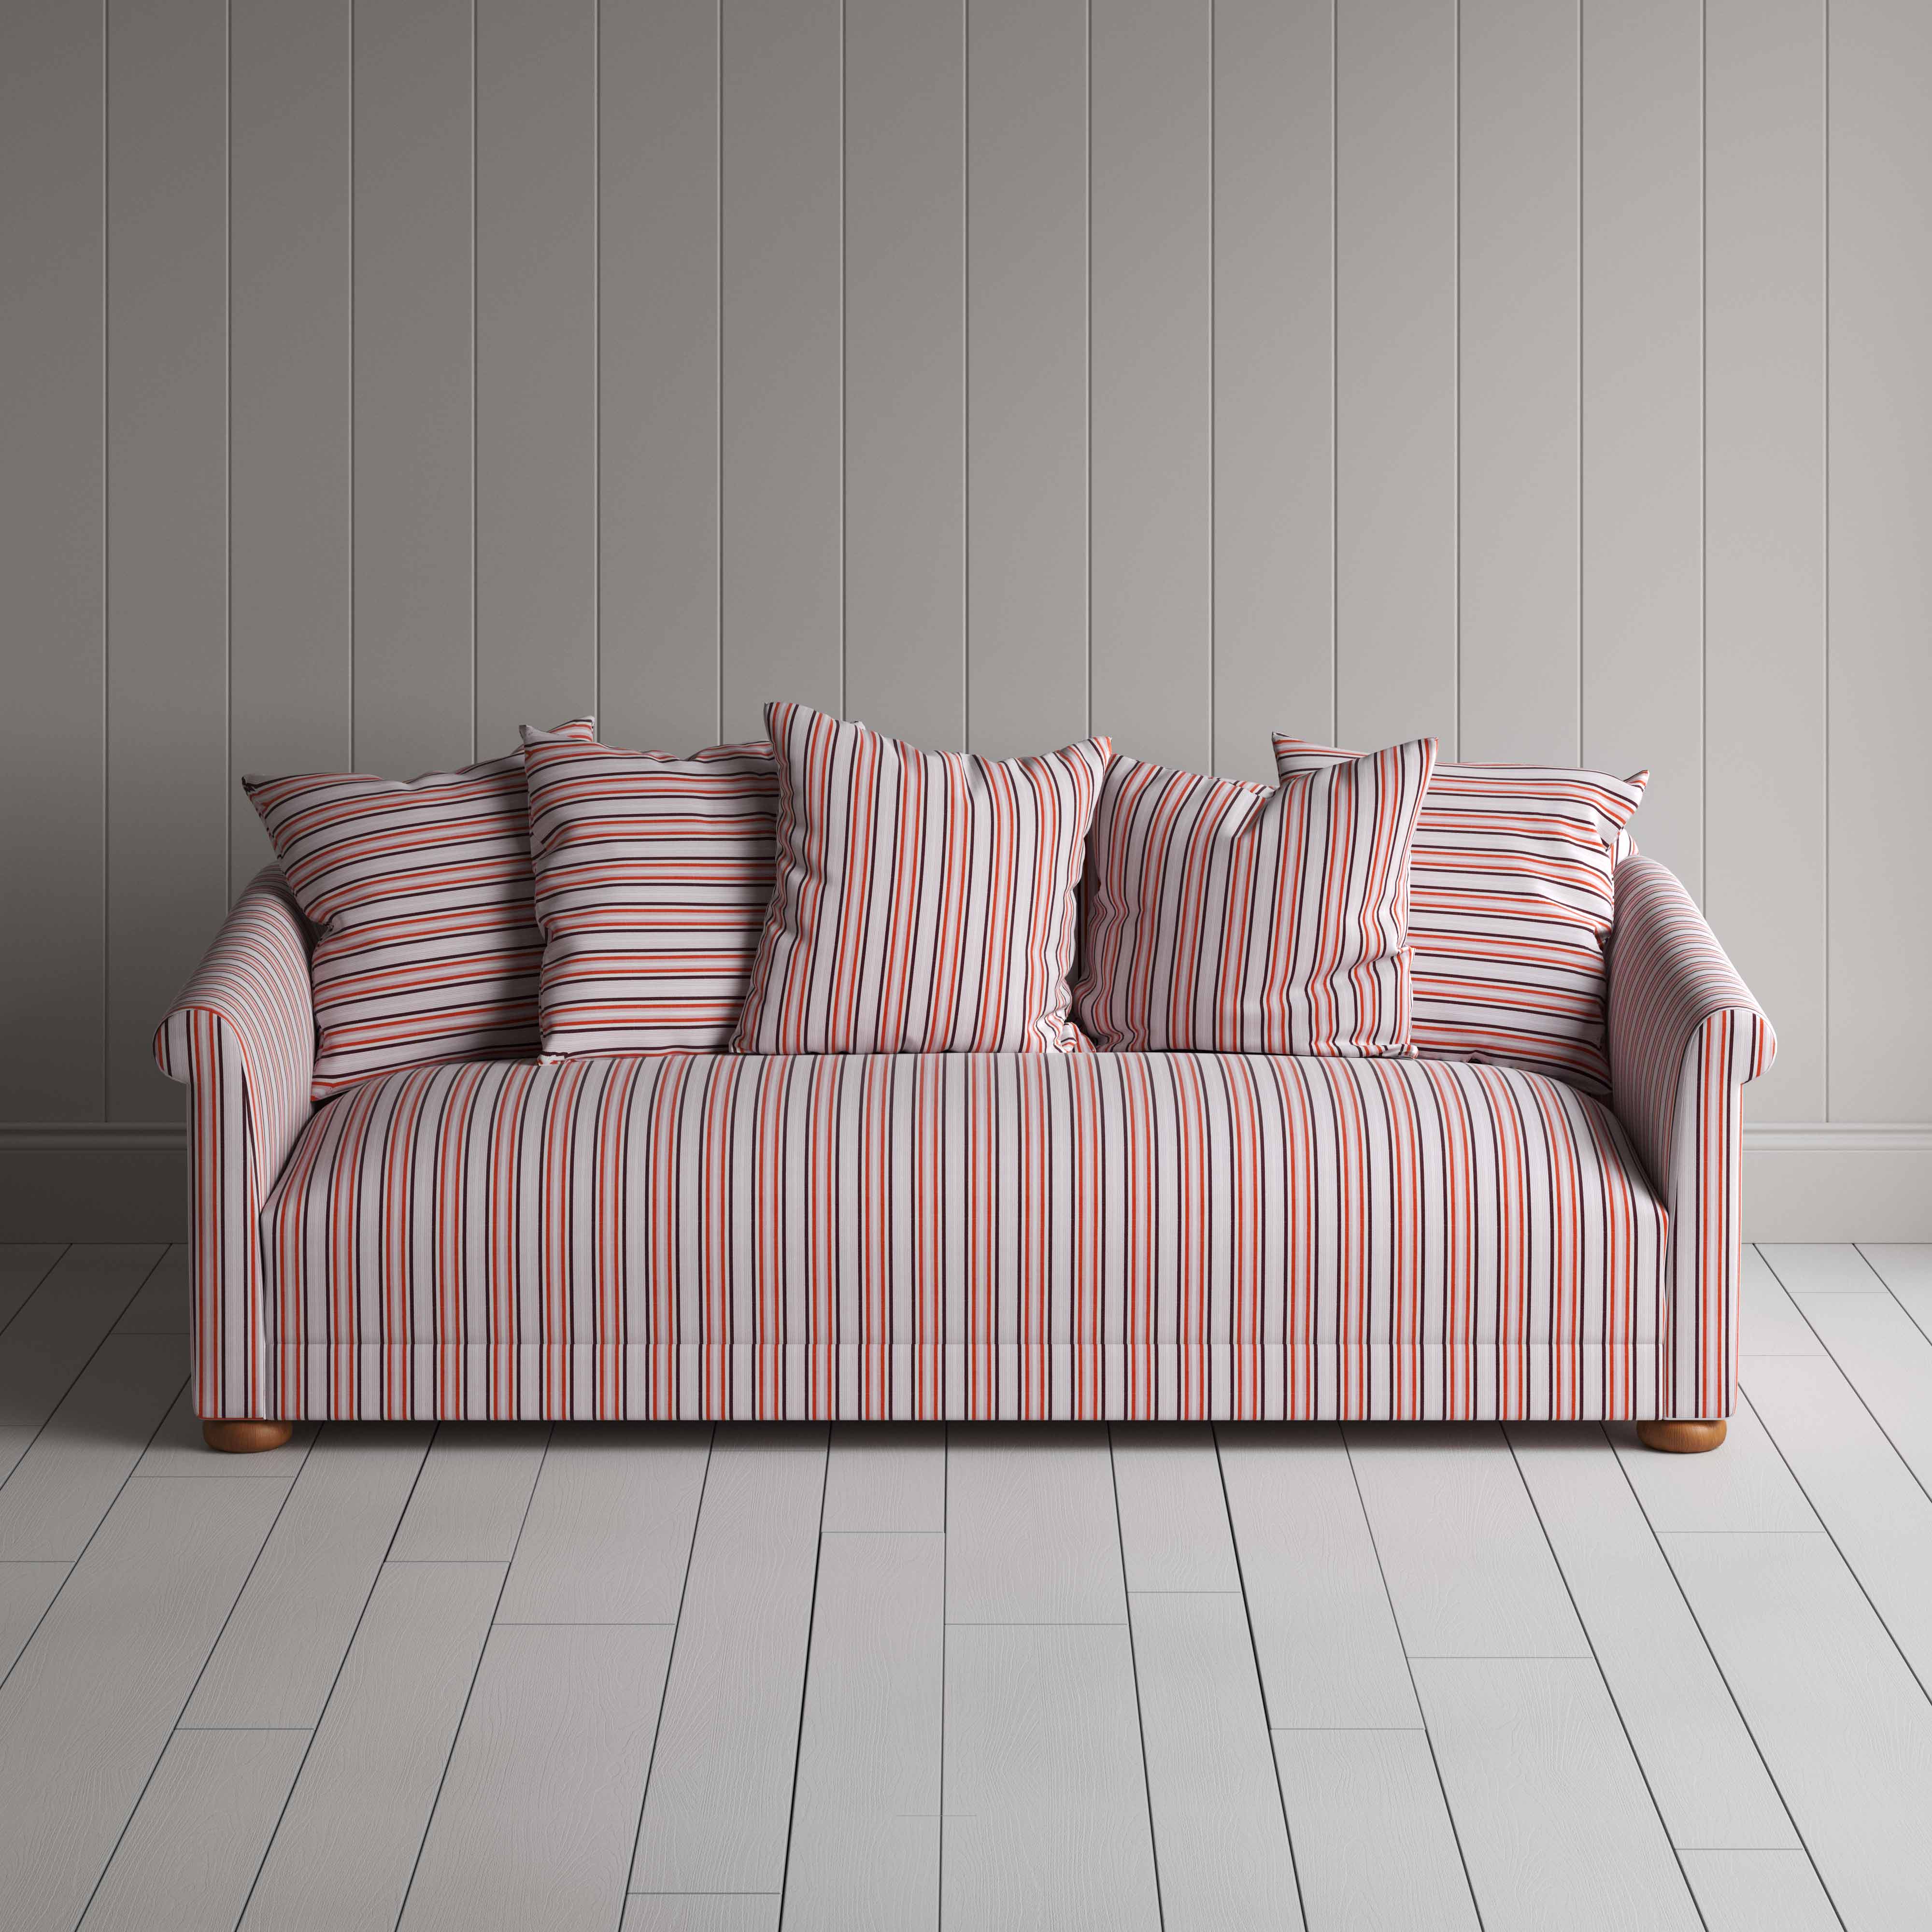  More the Merrier 4 Seater Sofa in Slow Lane Cotton Linen, Berry 